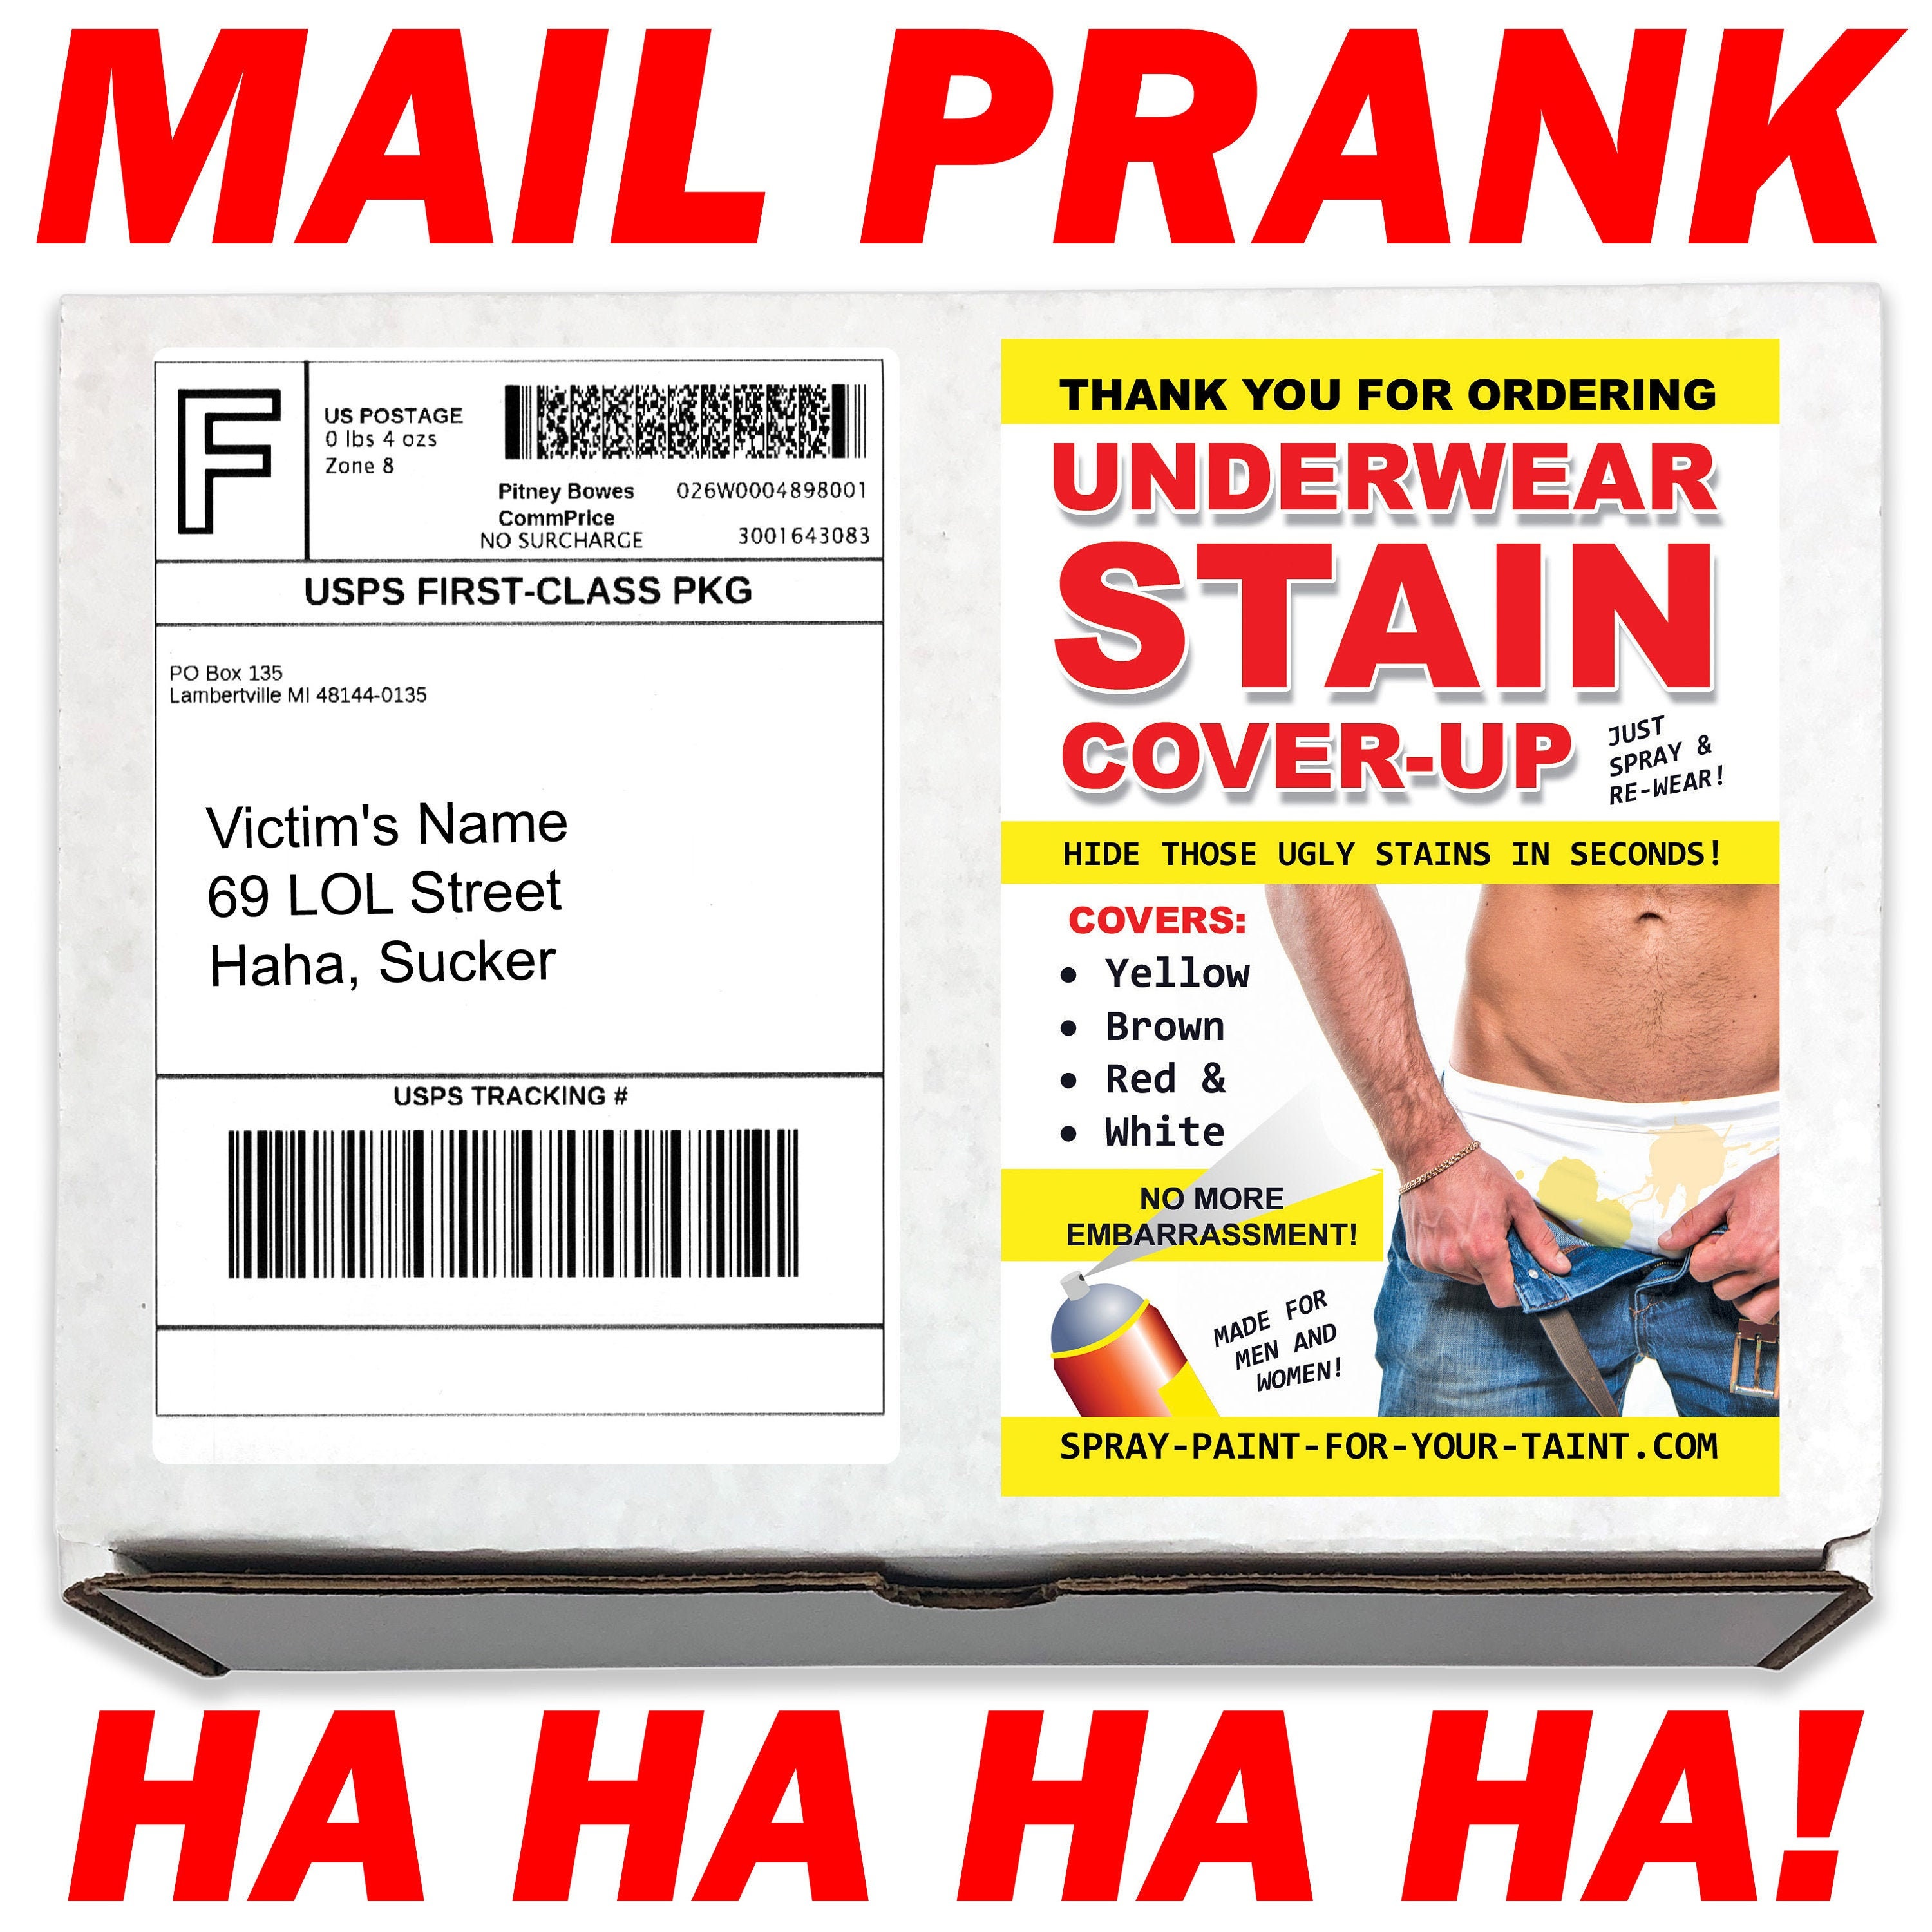 Underwear Stain Cover Up Prank Mail  Box Gag Gift Funny Prank Present gets sent directly to a Loved OneVictimFoodieMom 100% Anonymous